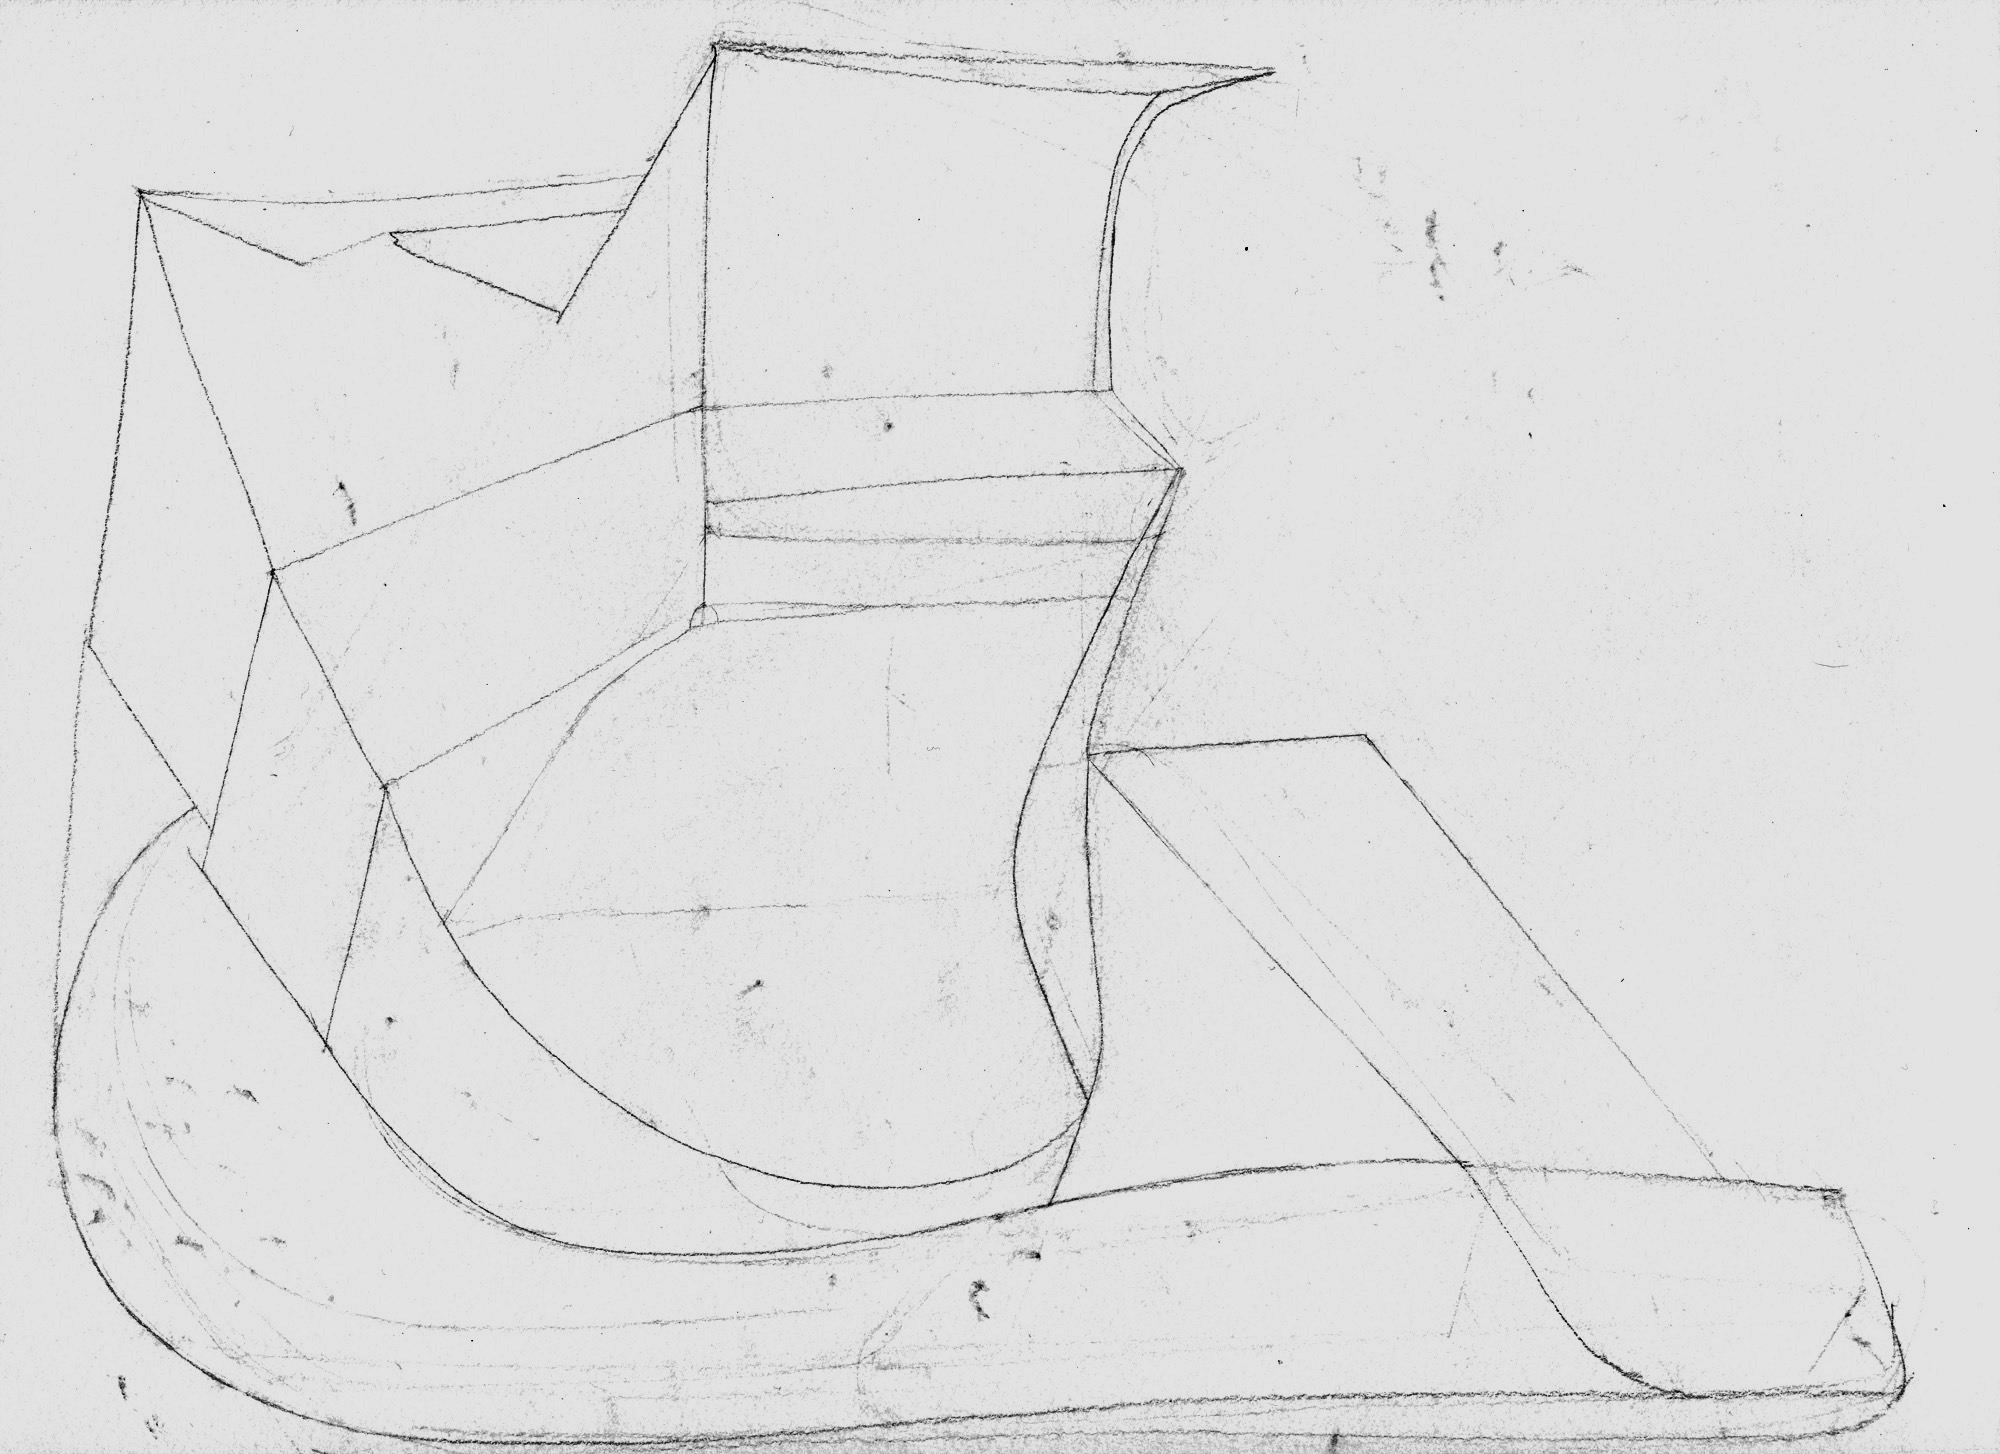 Many of my sculptures and prints start as drawings. As a pencil makes marks on a paper, the action connects the moment with my perceptions, material reality and possibilities. It grounds me to the universe and allows me to see and feel the unknown. This is how the seed of the piece is planted. From then on, I follow the growth with curiosity, openness, and patience.